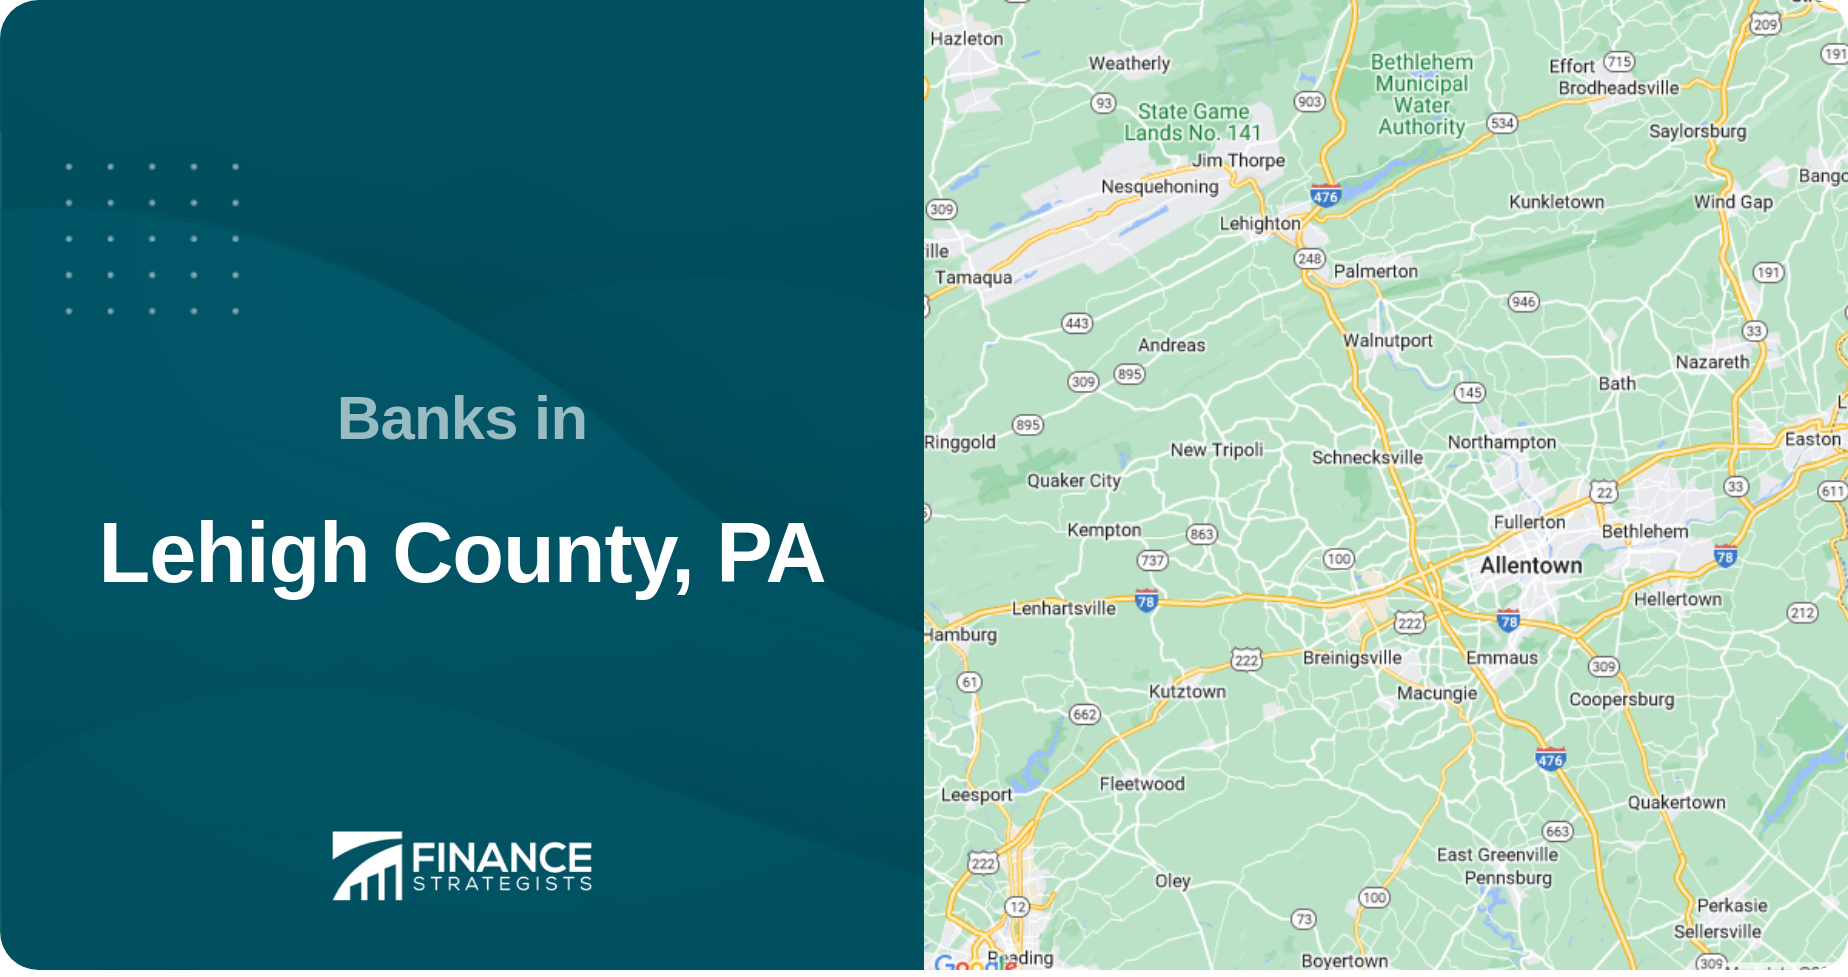 Banks in Lehigh County, PA